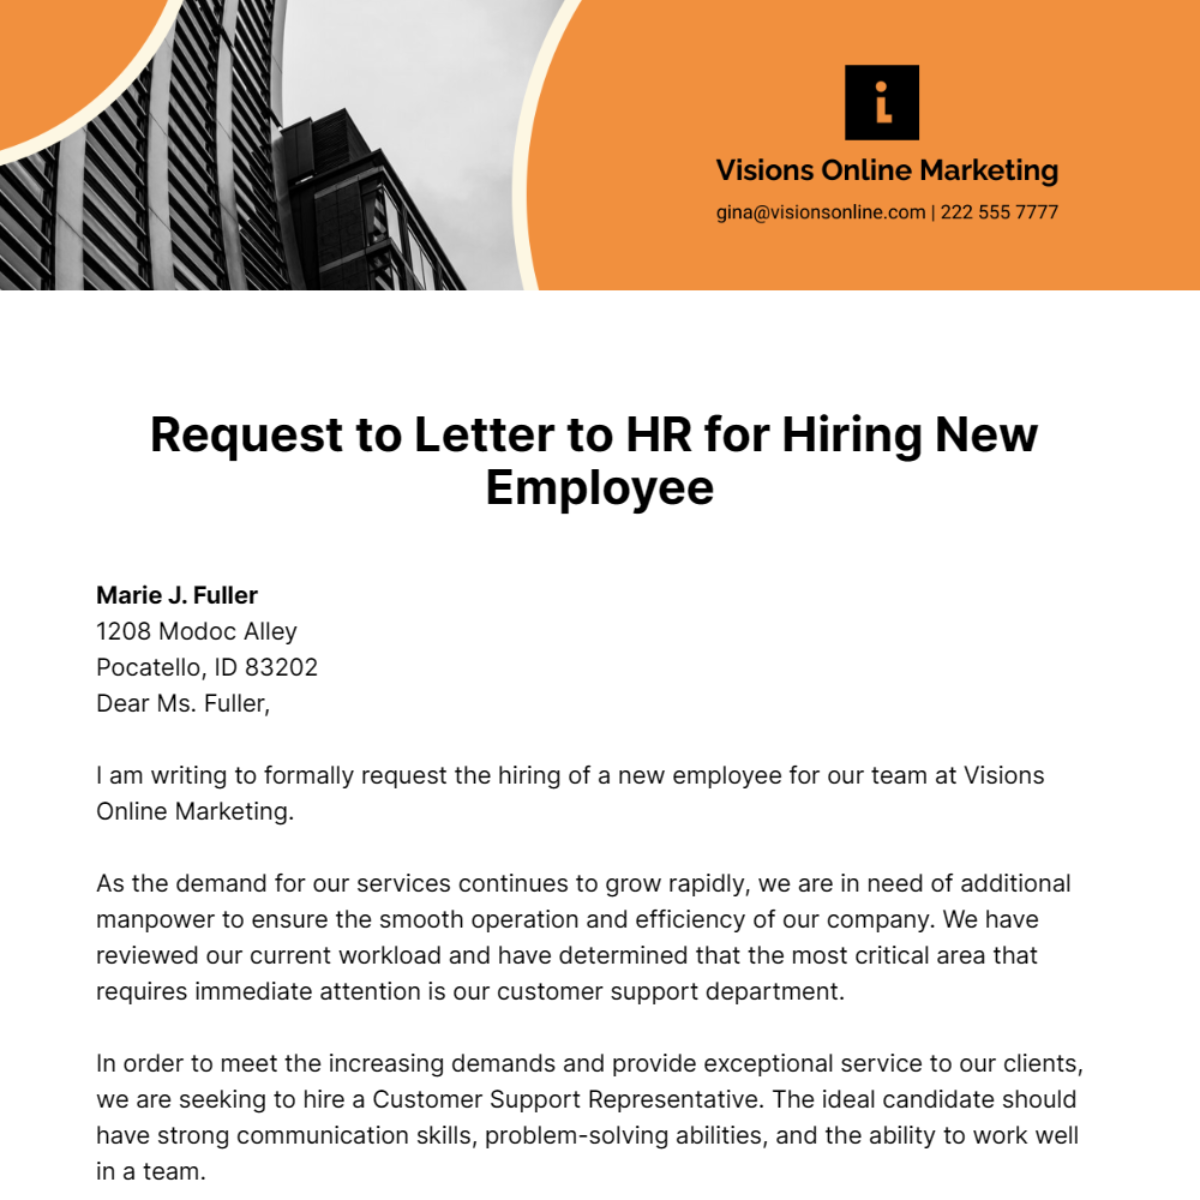 Request to Letter to HR for Hiring New Employee Template